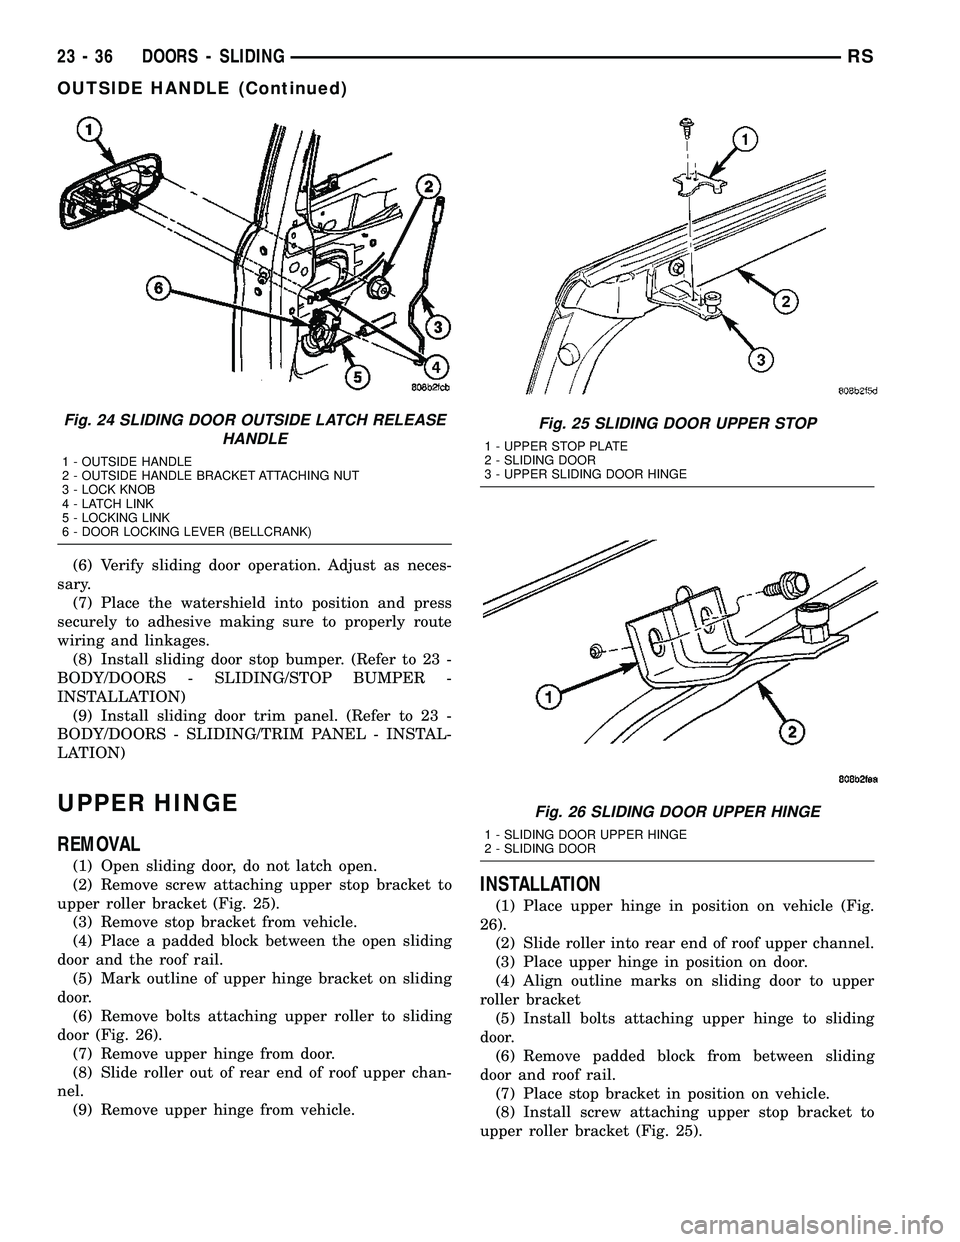 DODGE TOWN AND COUNTRY 2004  Service Manual (6) Verify sliding door operation. Adjust as neces-
sary.
(7) Place the watershield into position and press
securely to adhesive making sure to properly route
wiring and linkages.
(8) Install sliding 